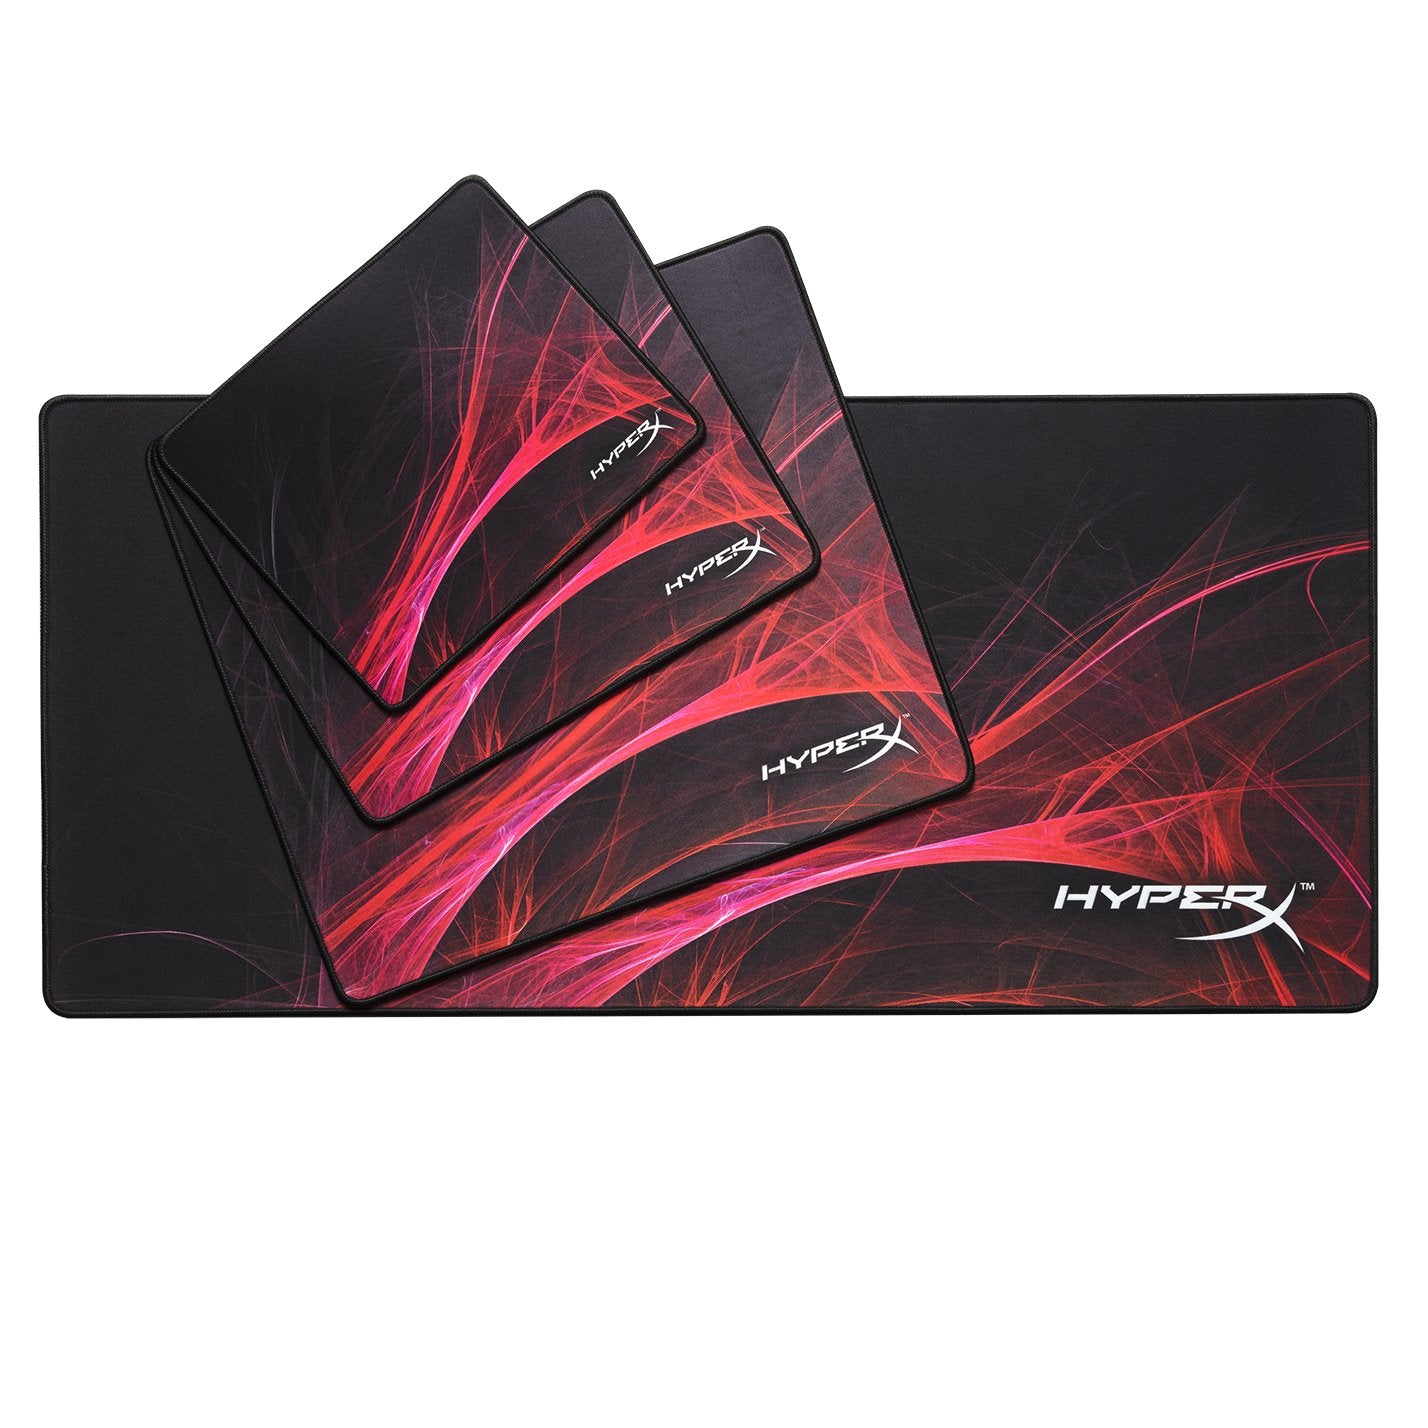 MOUSE-PAD-HYPERX-FURY-S-SPEED---LARGE-(HX-MPFS-S-L)